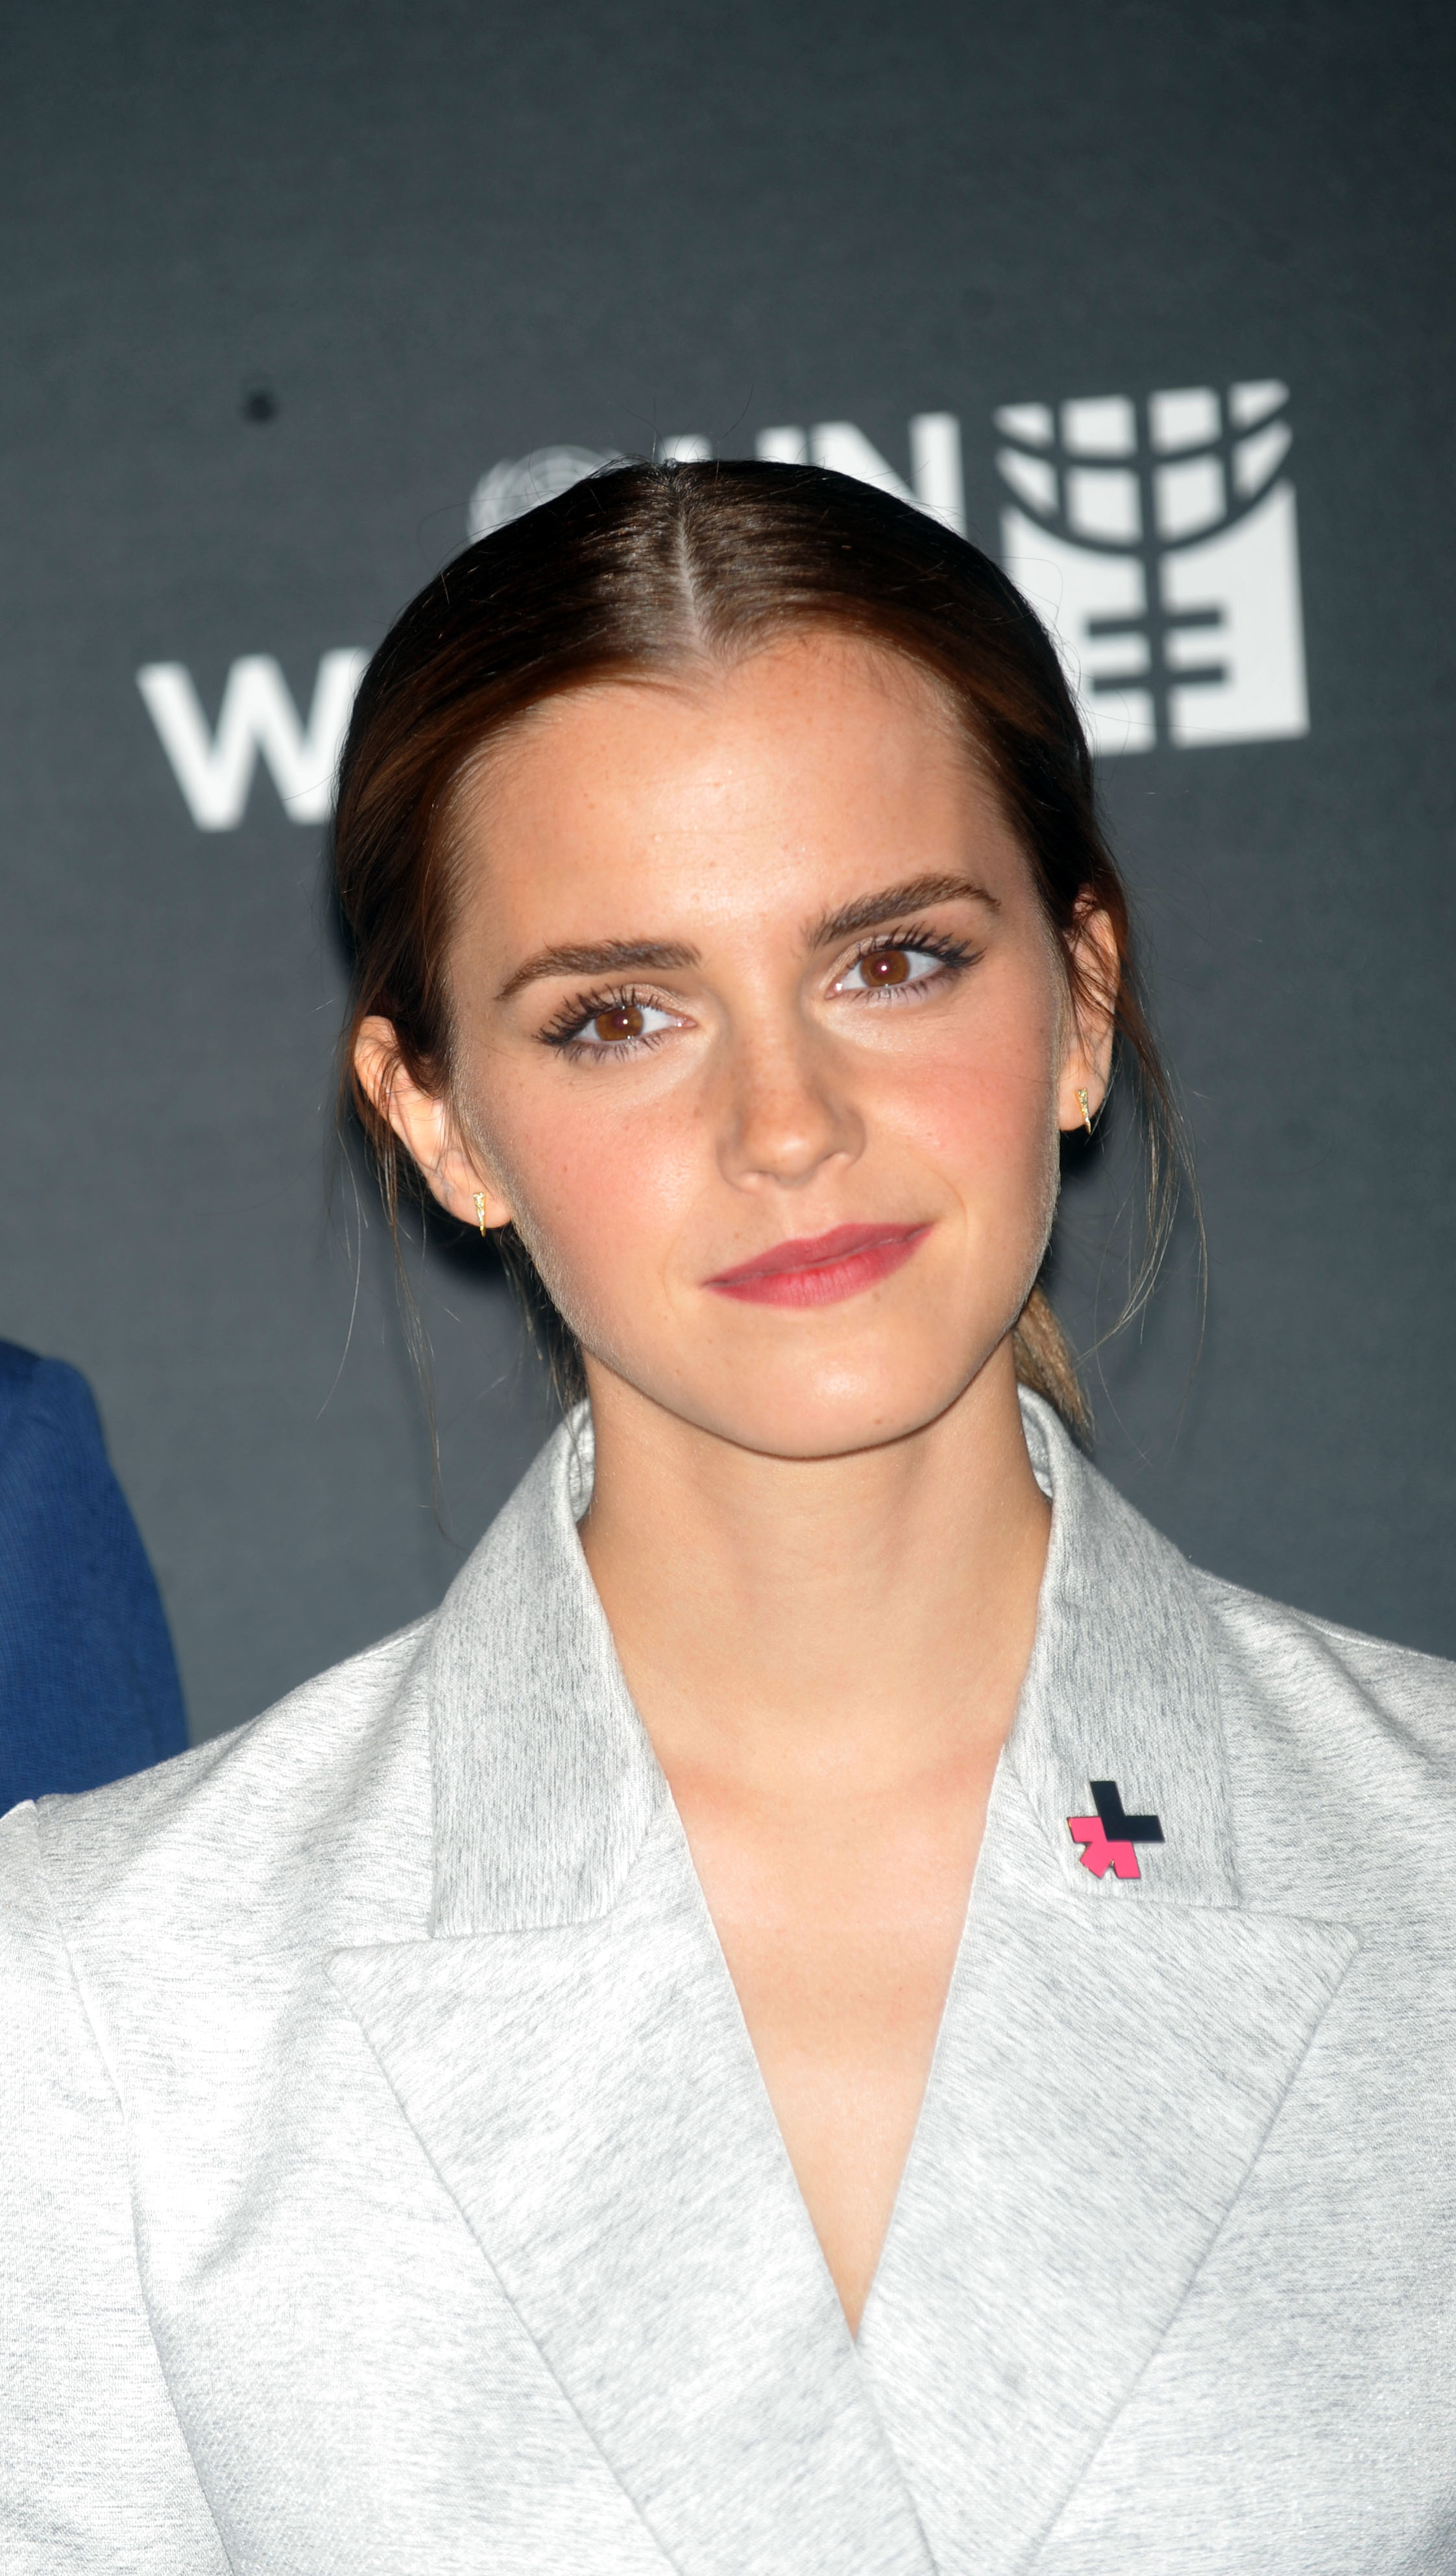 Emma Watson attends the launch of the HeForShe Campaign at the United Nations on September 20, 2014 in New York City. (Steve Sands—WireImage/Getty Images)